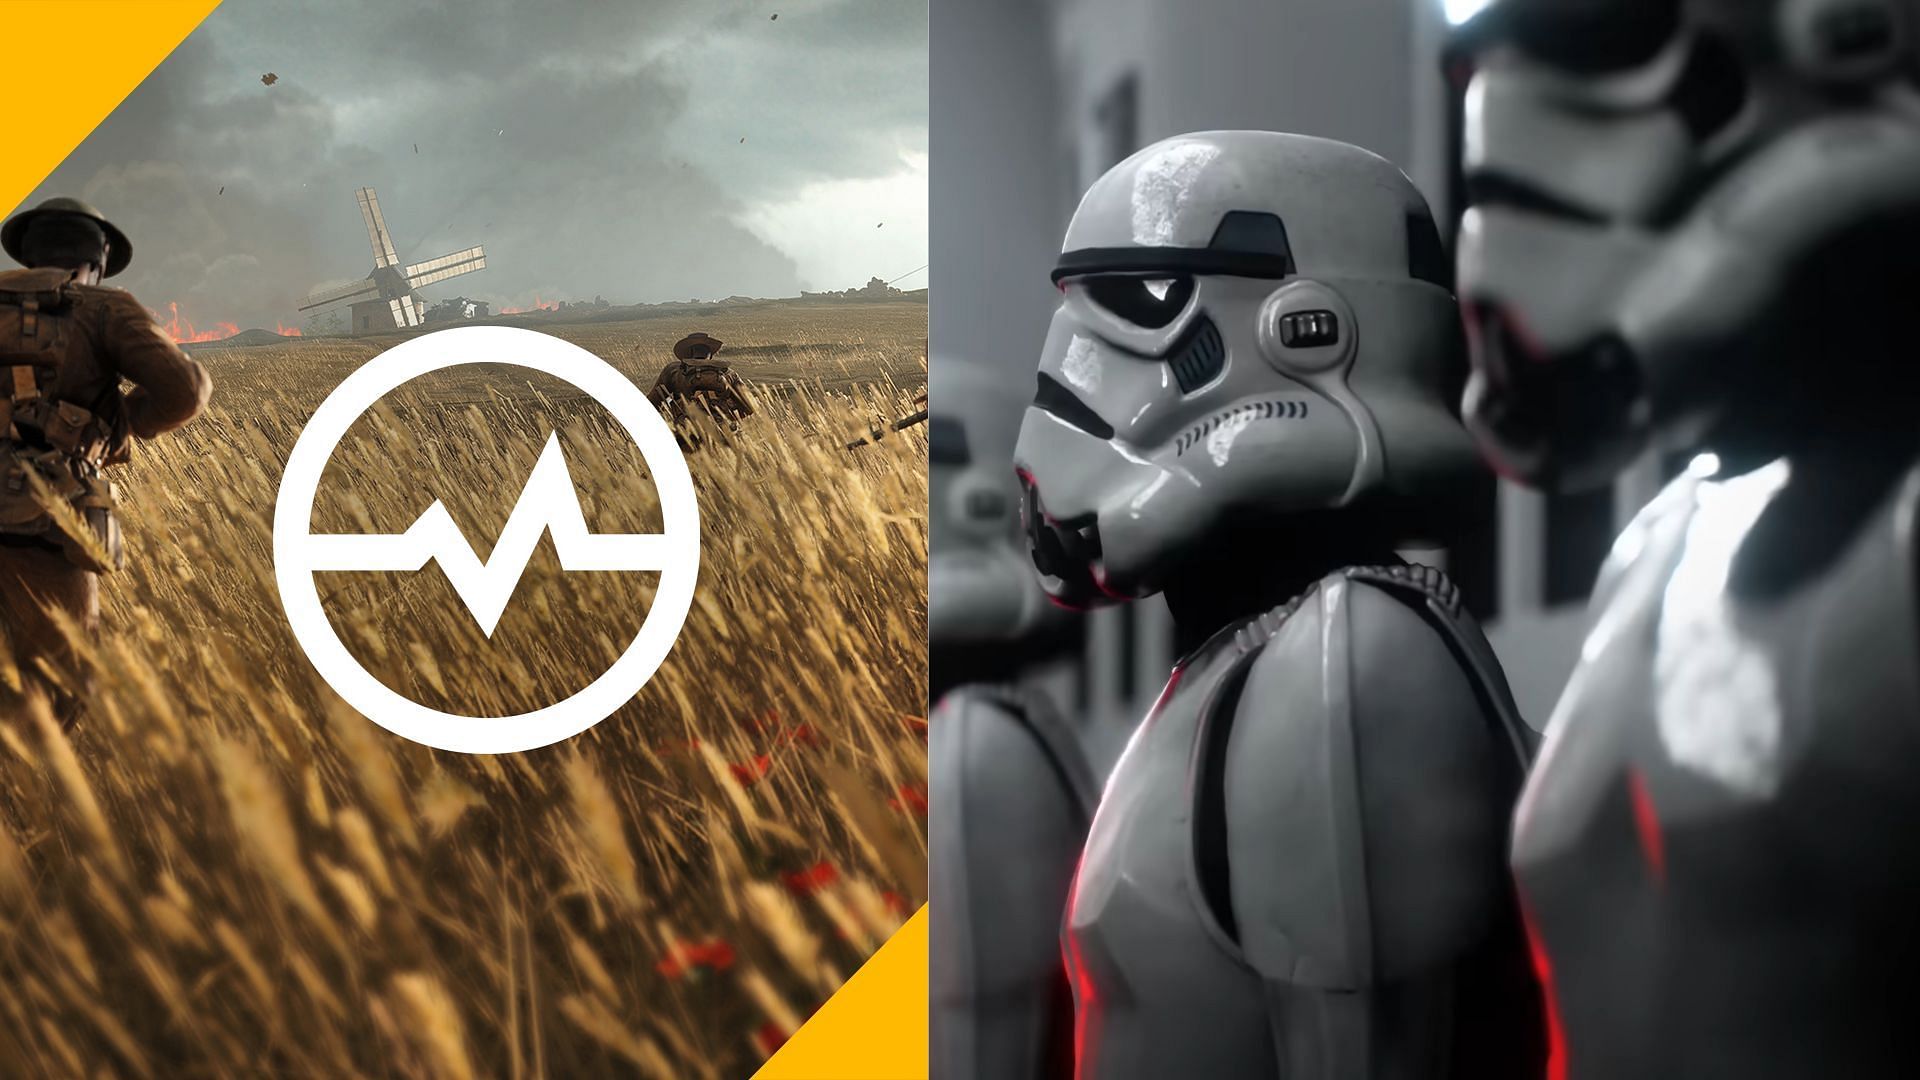 Battlefield 1 and Star Wars Battlefront II downtime will disrtupt the online playthrough for some time, Battlefield 1 and Star Wars Battlefront II downtime